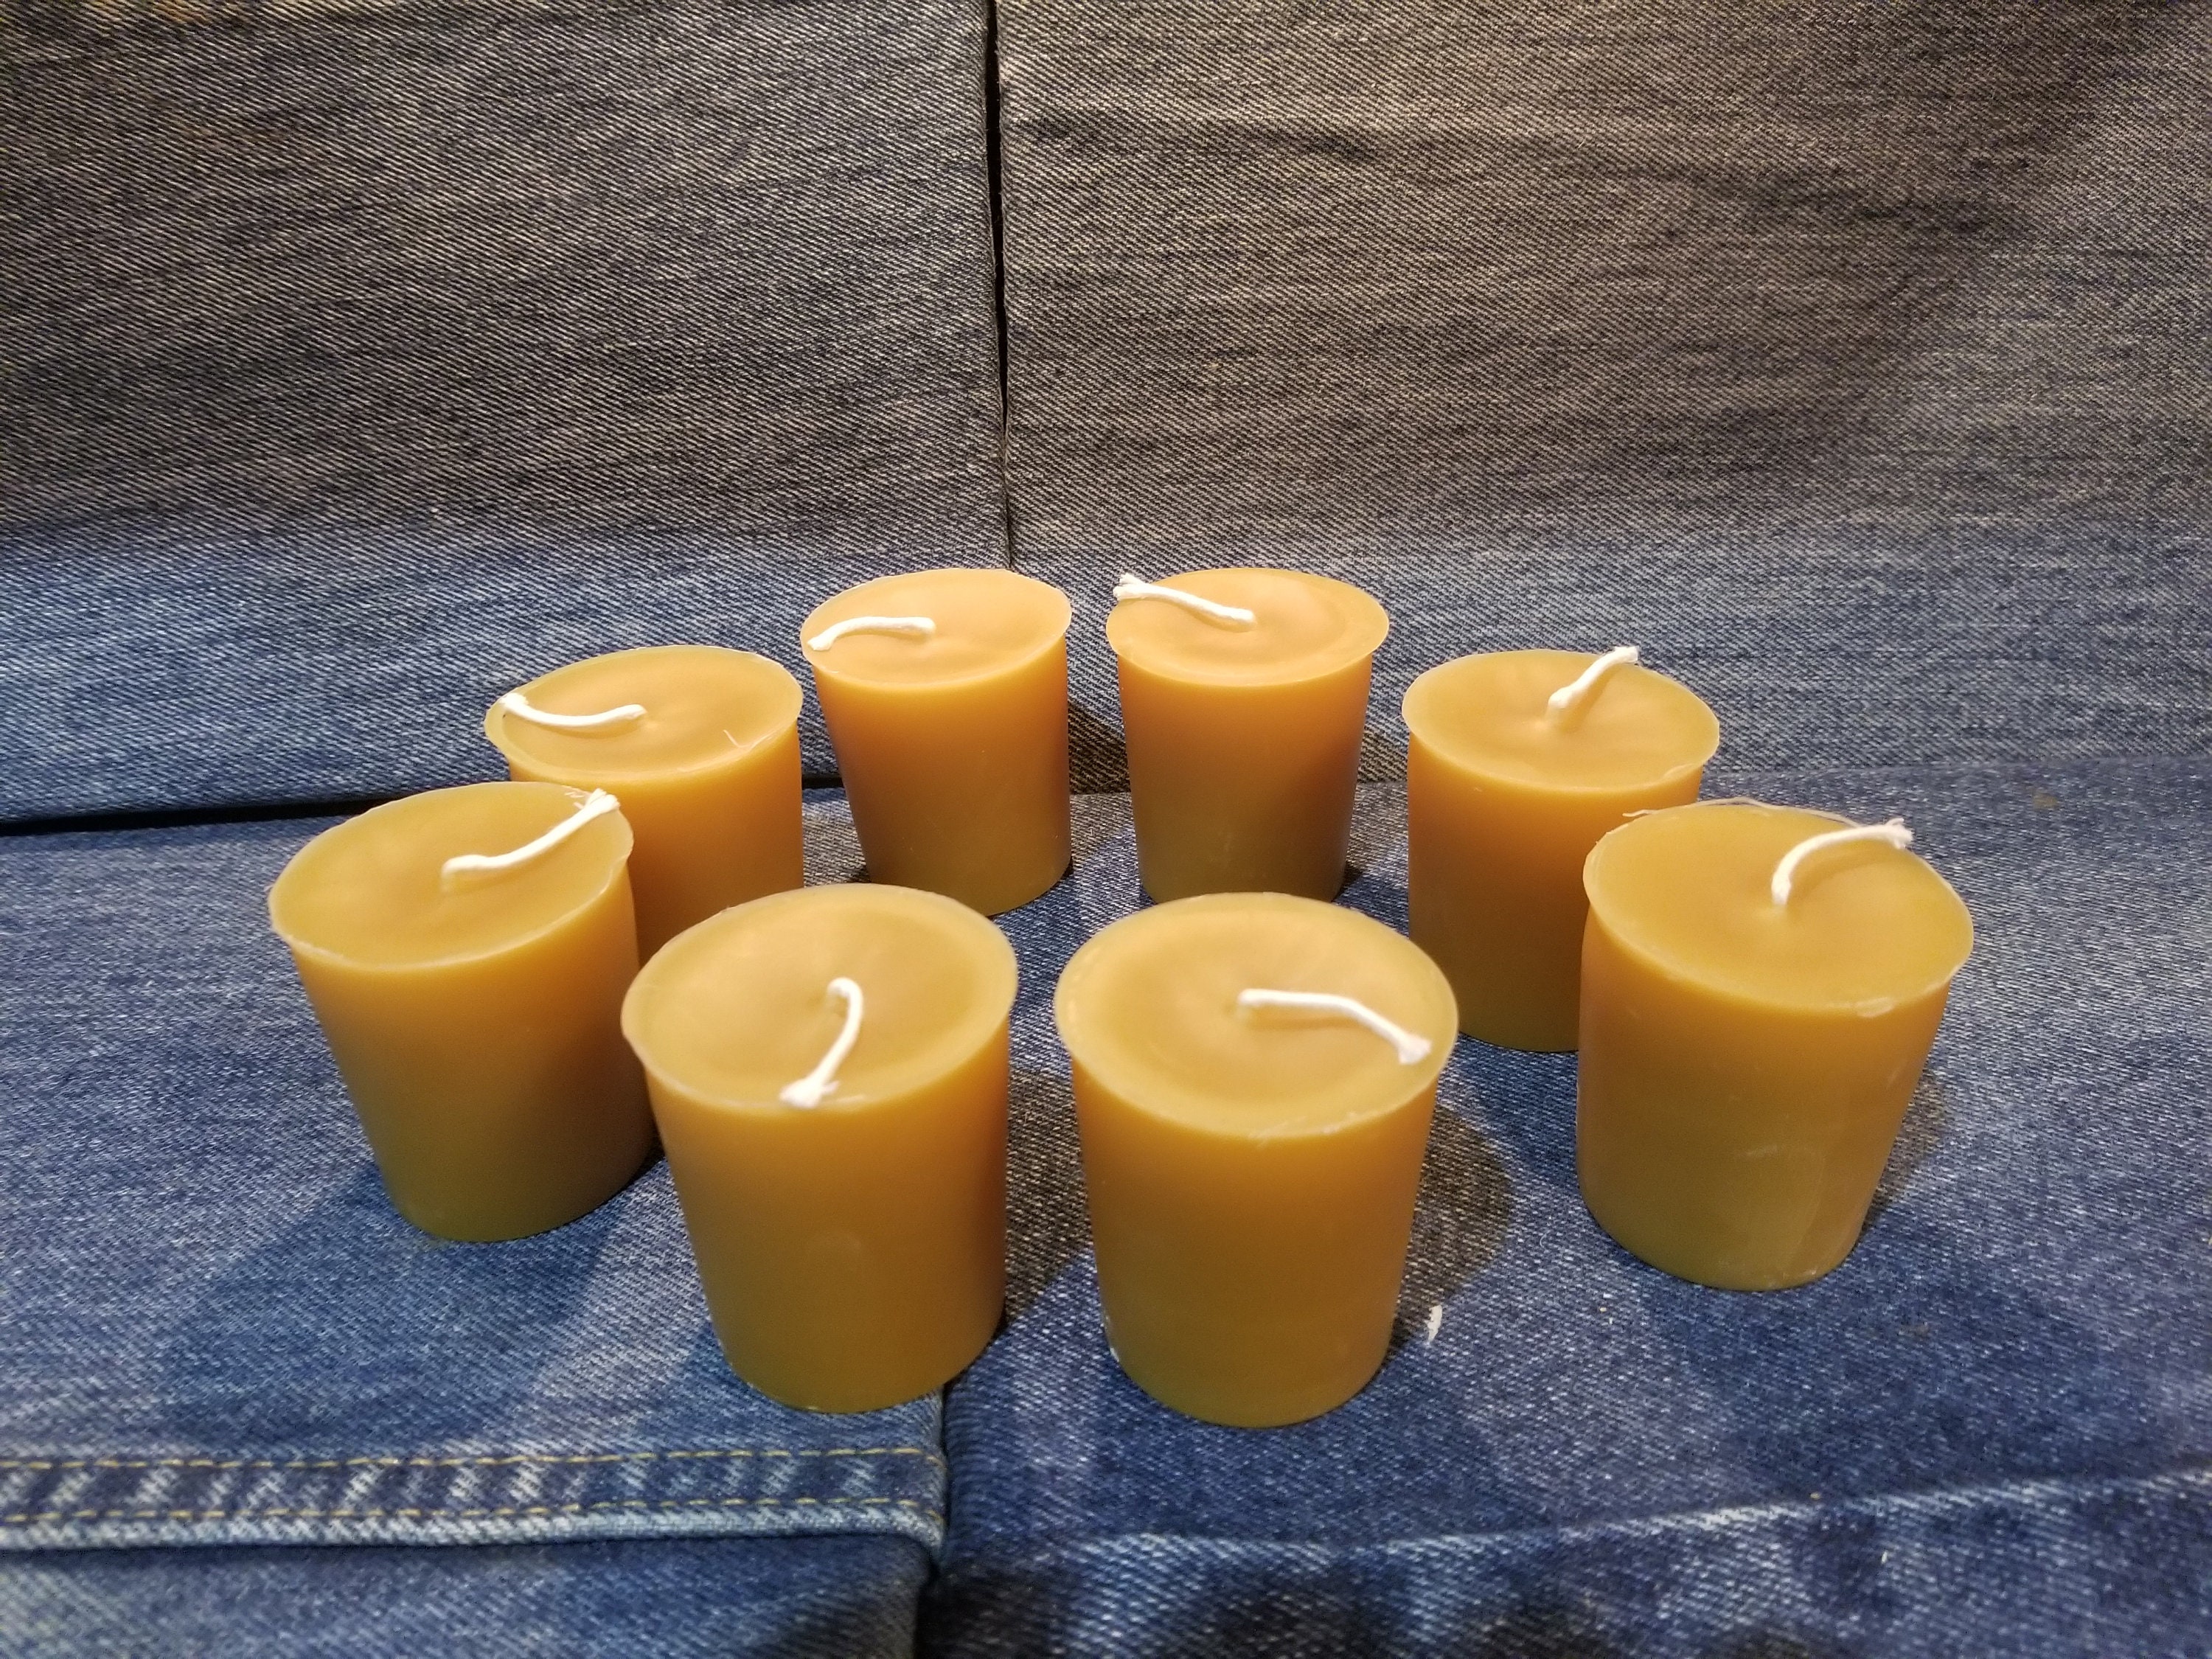 BlueBee Pure Beeswax Candles Bulk for Home - 50pcs Tall Thin 50 pcs Yellow